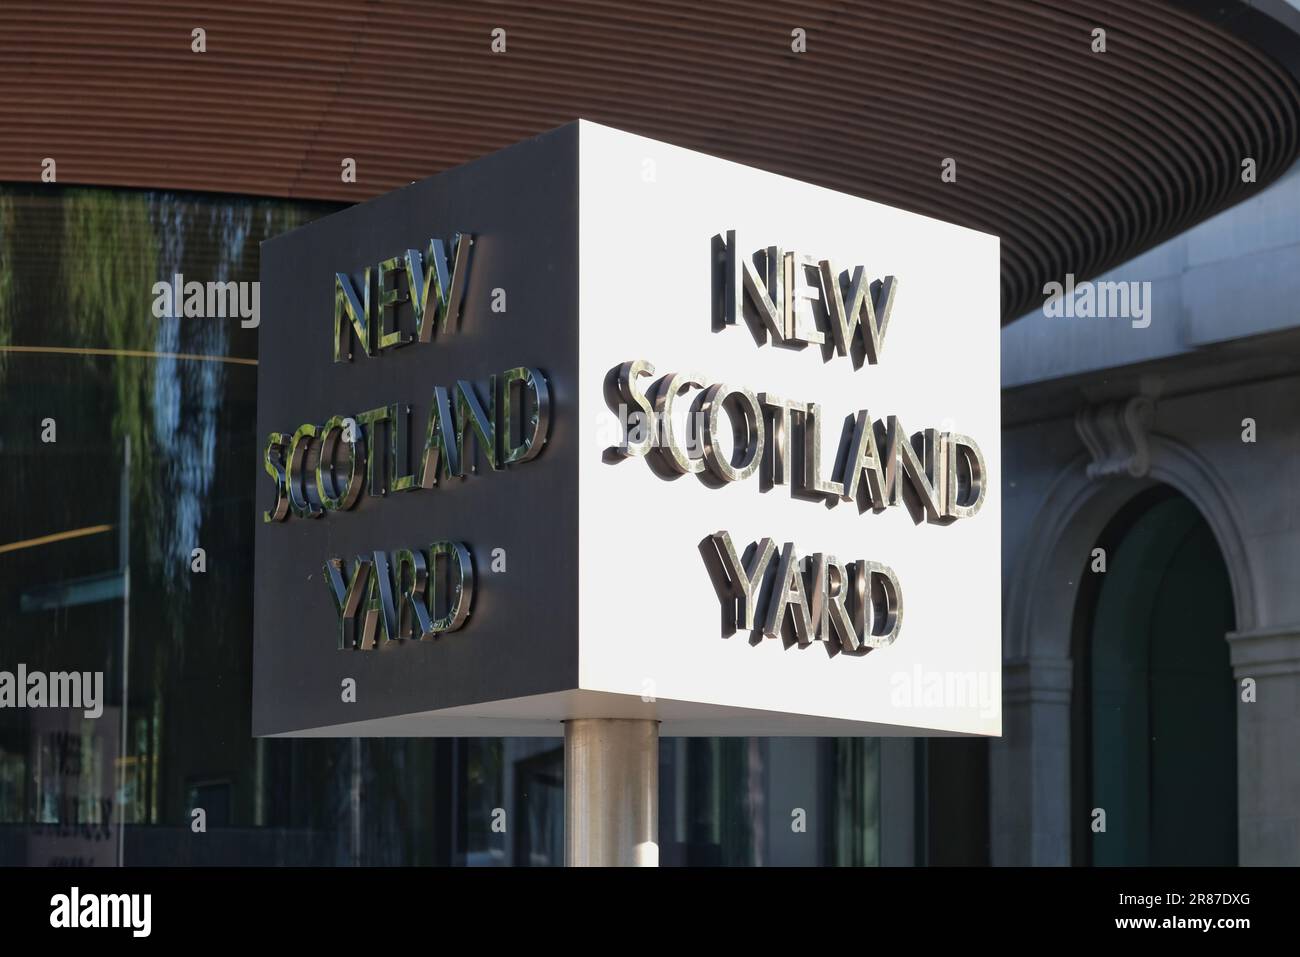 London, UK. The rotating sign for New Scotland Yard, the headquarters of the Metropolitan Police located on the Victoria Embankment. Stock Photo